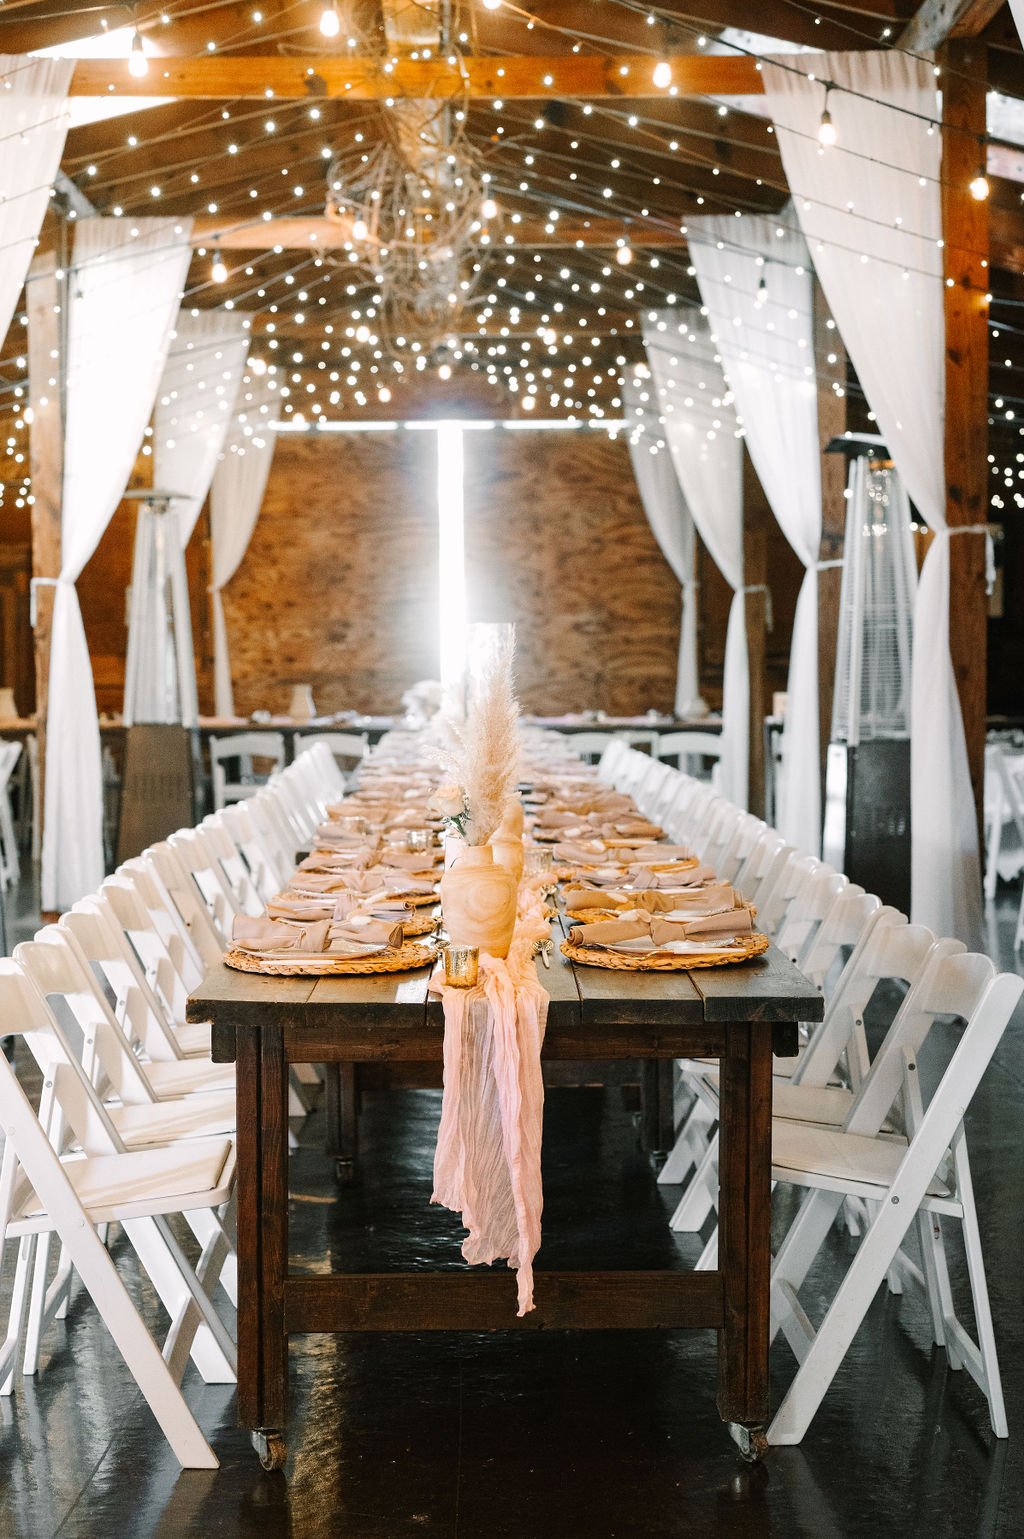 delaney-and-joshuas-real-savannah-wedding-at-red-gate-farms-planned-by-savannah-wedding-planner-ivory-and-beau-with-wedding-florals-from-savannah-wedding-florist-ivory-and-beau-shot-by-5d-photography-savannah-wedding-savannah-bride-10.jpg